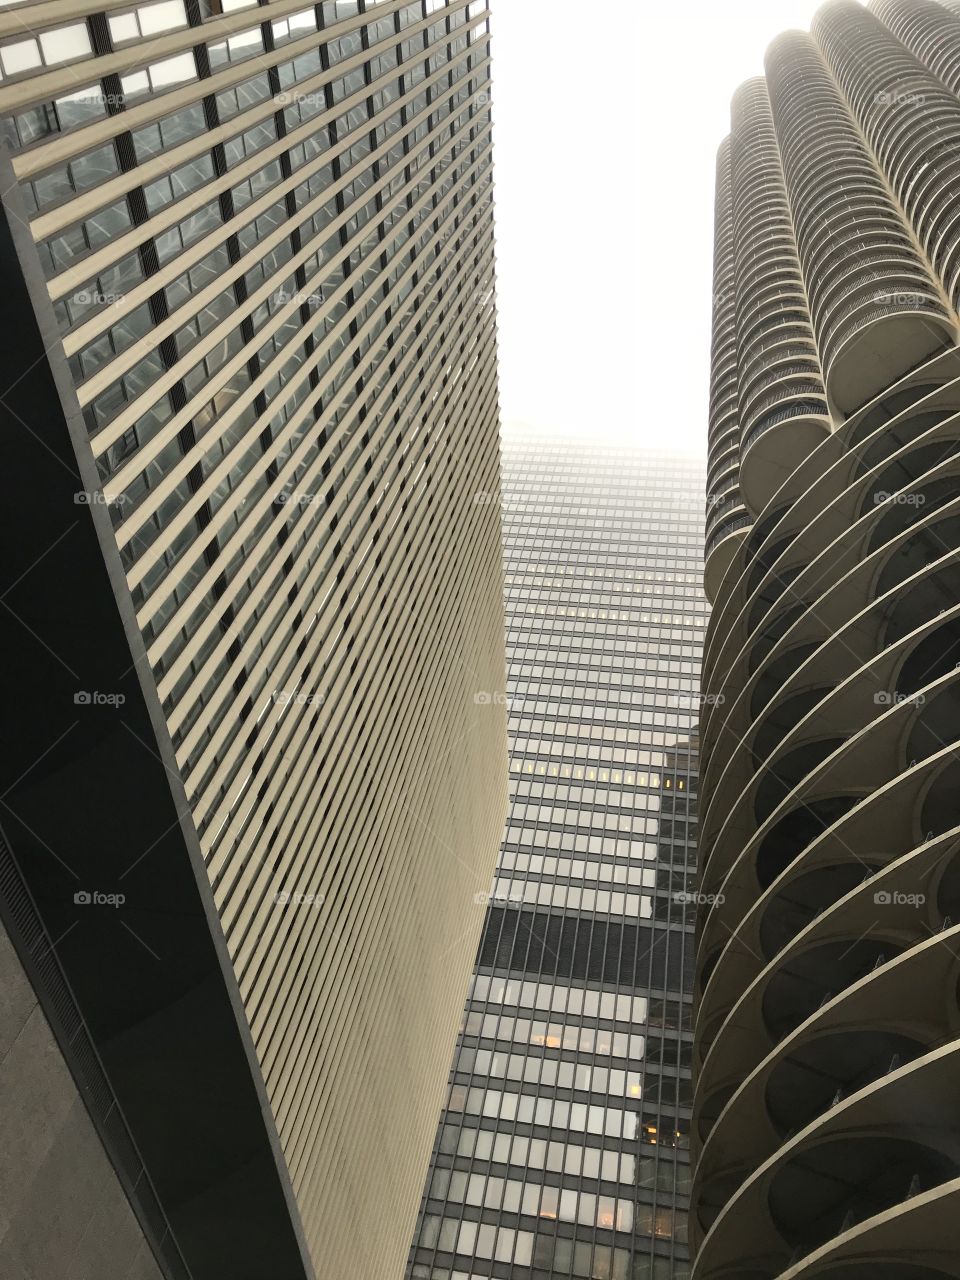 Buildings in Chicago